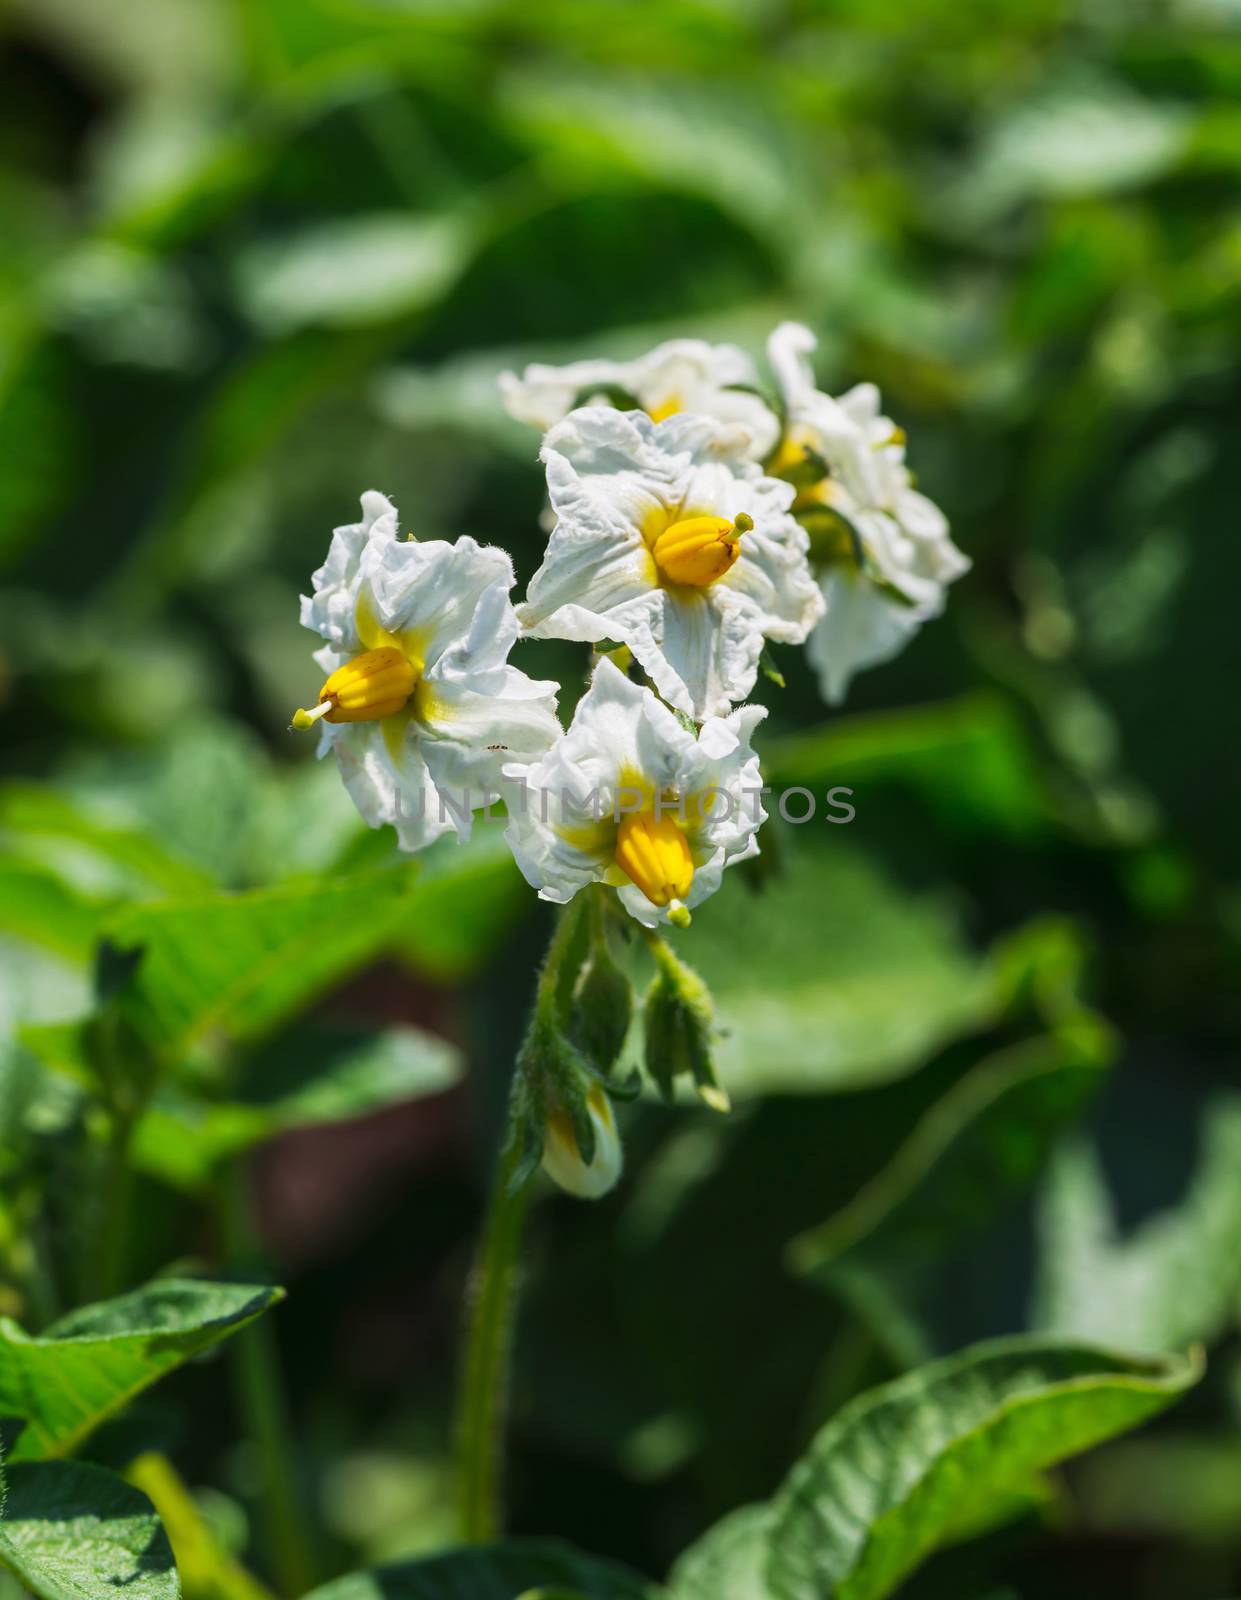 The potato bush blooming with white flower